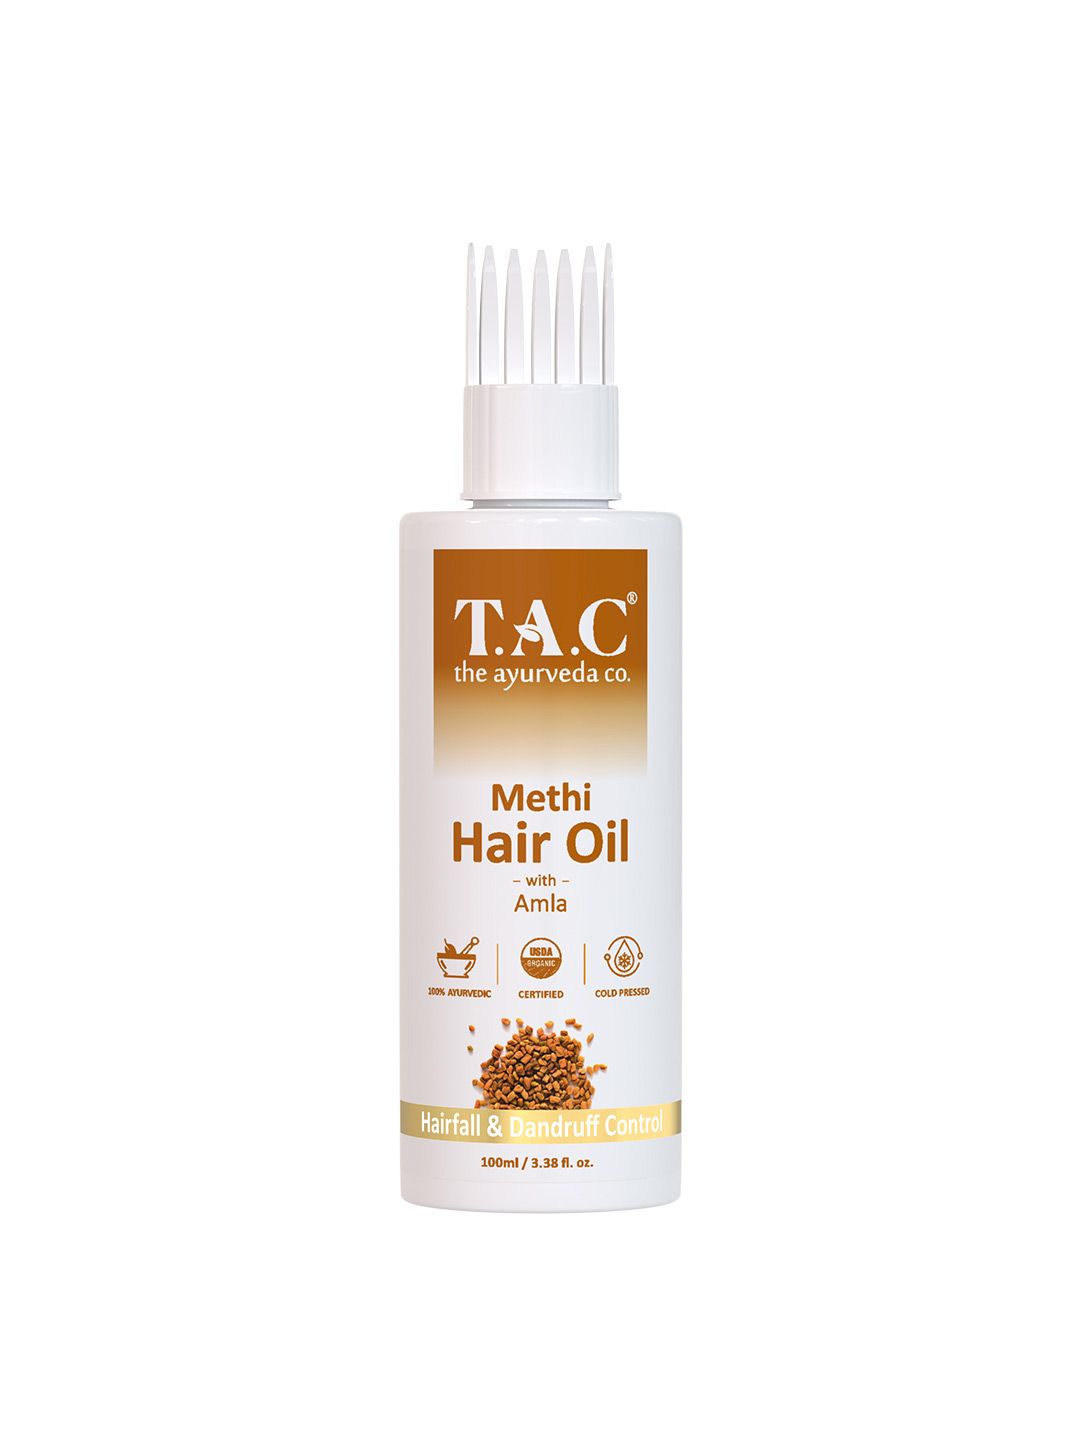 TAC - The Ayurveda Co. Hair Oil for Hair Fall with Methi, Bhringraj, Amla & Swiss Actives Price in India